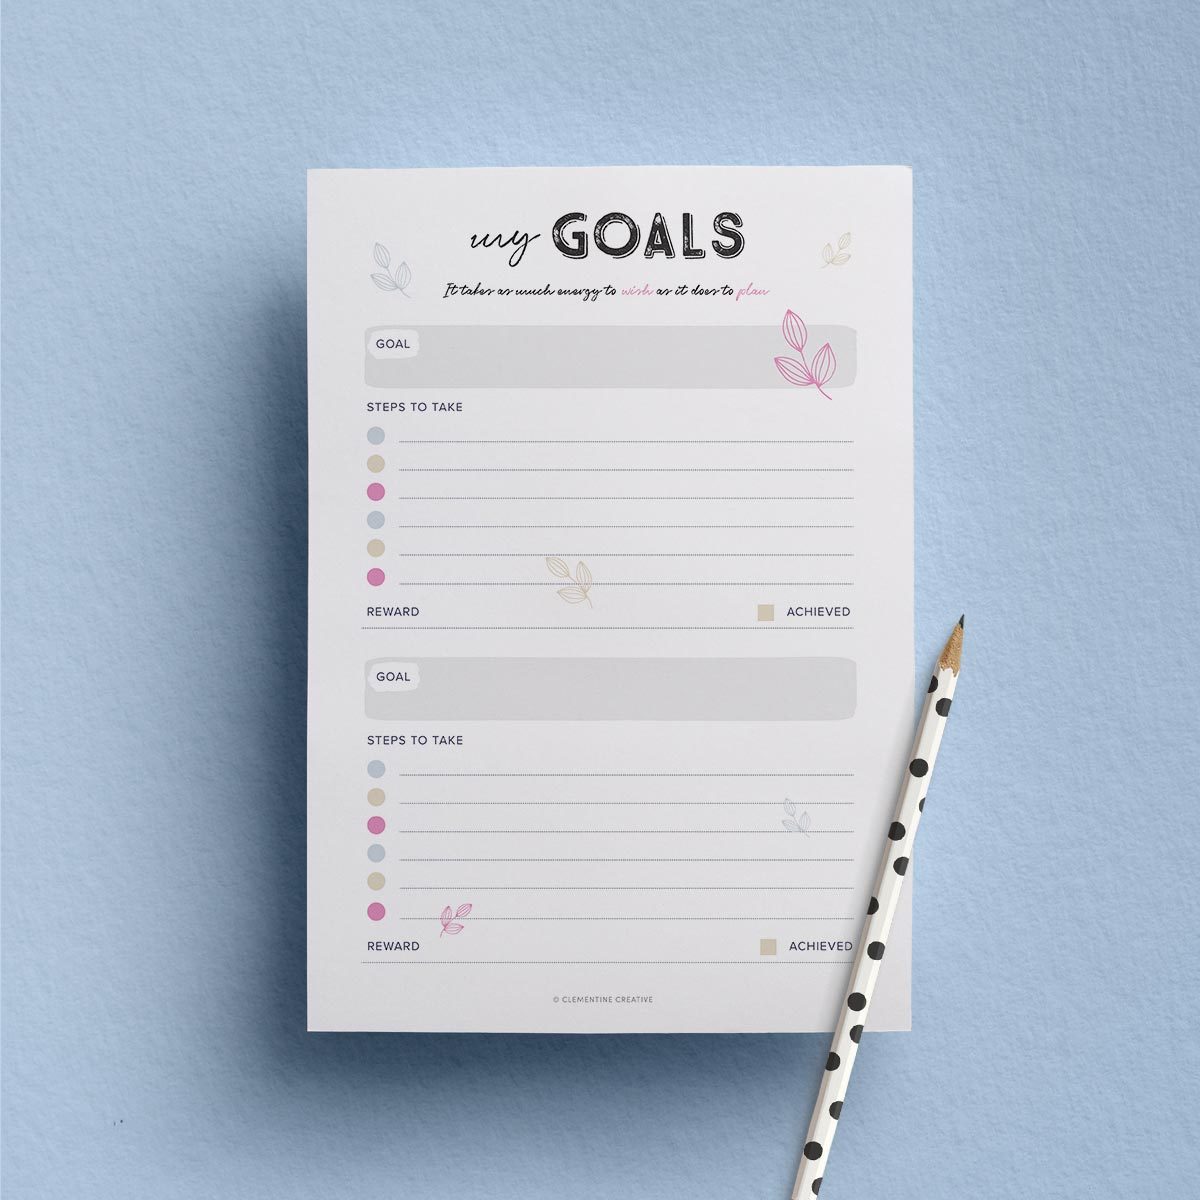 Clementine Creative goals template on a blue surface with a pencil